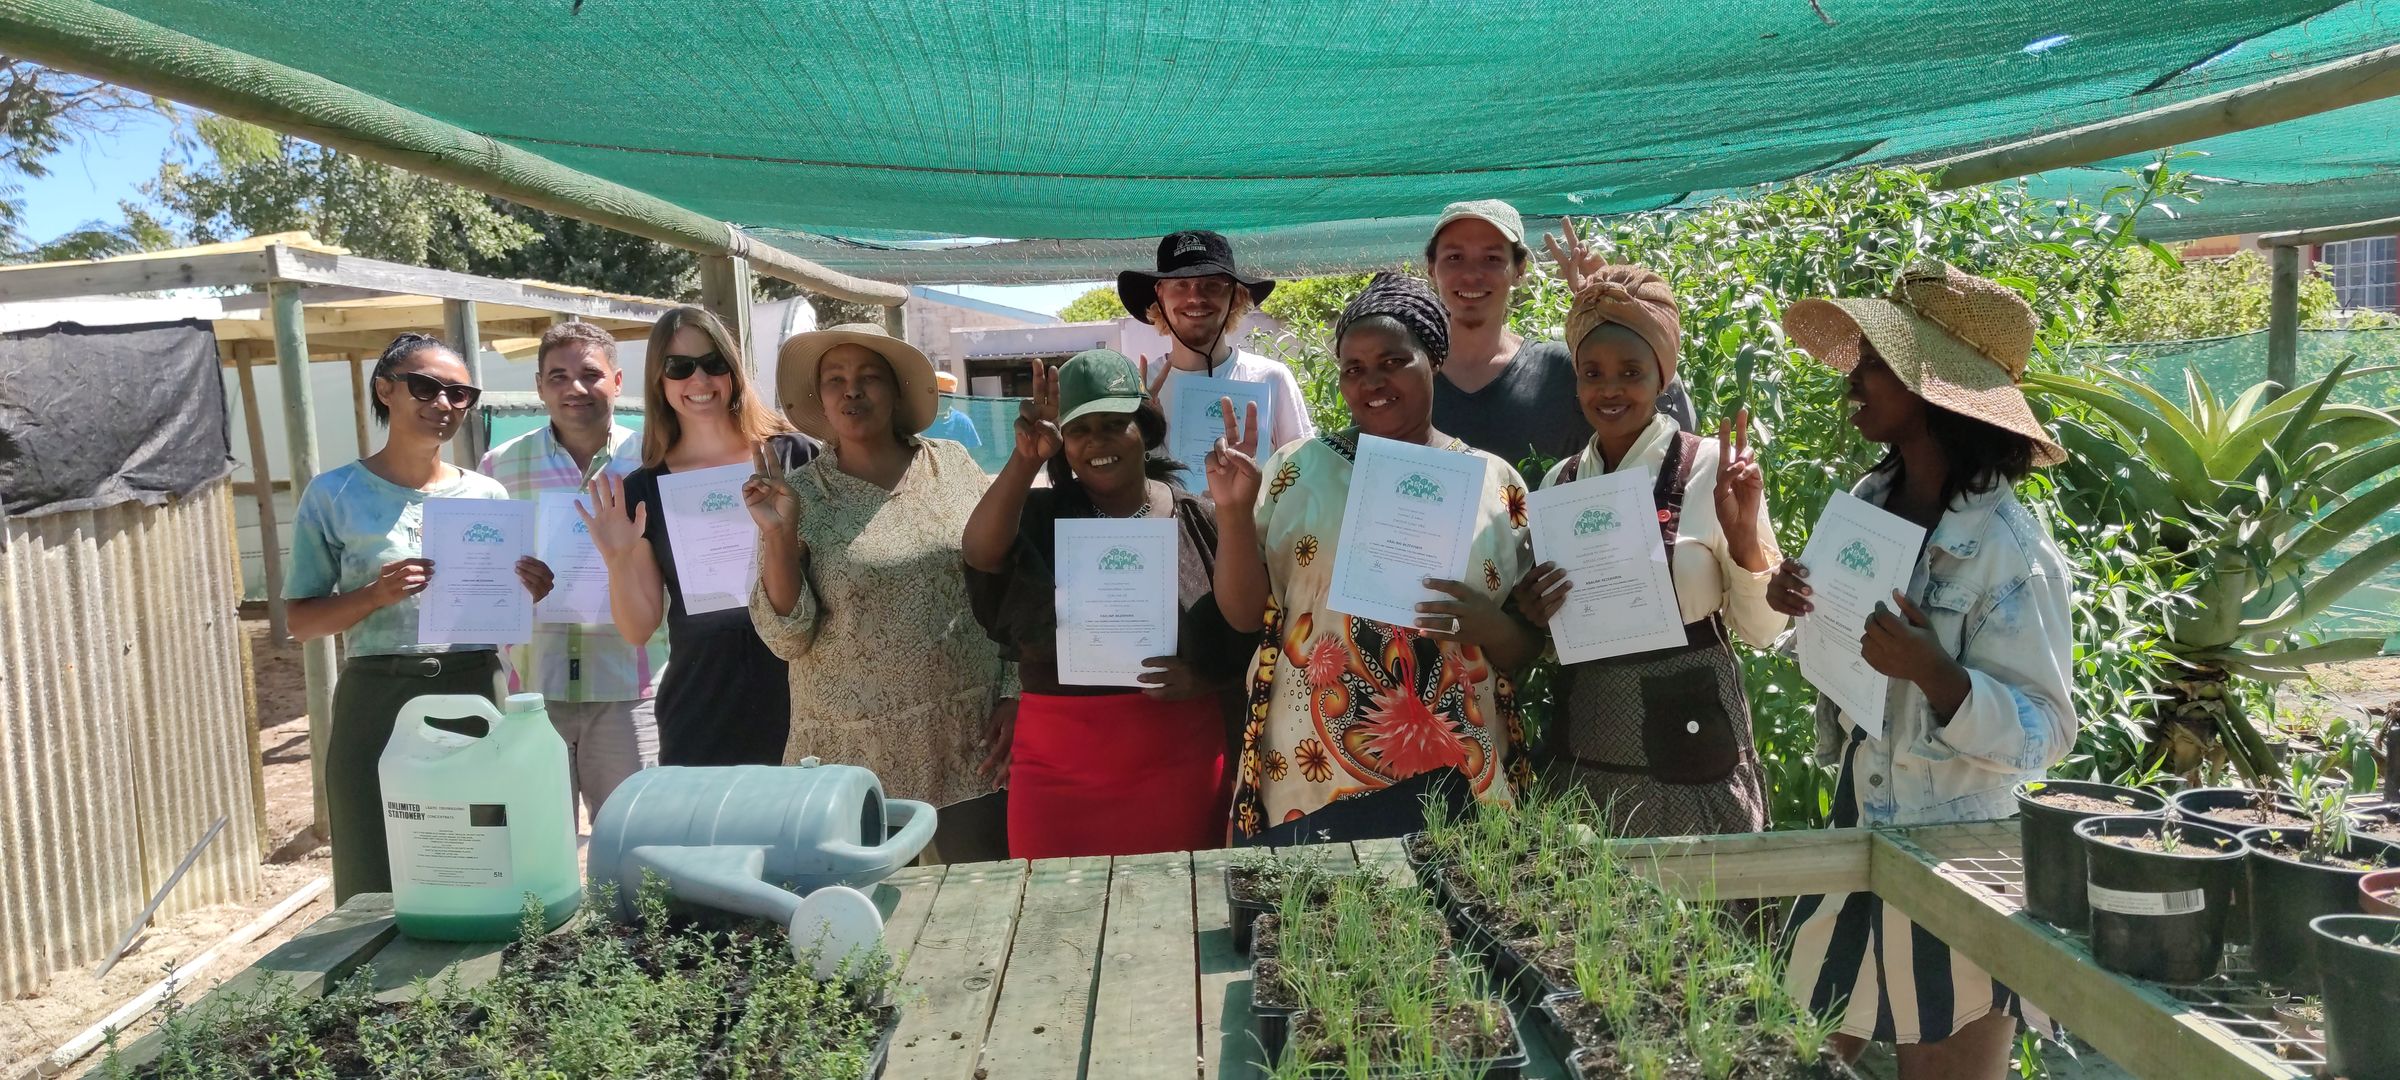 Participants of gardening course with certificates